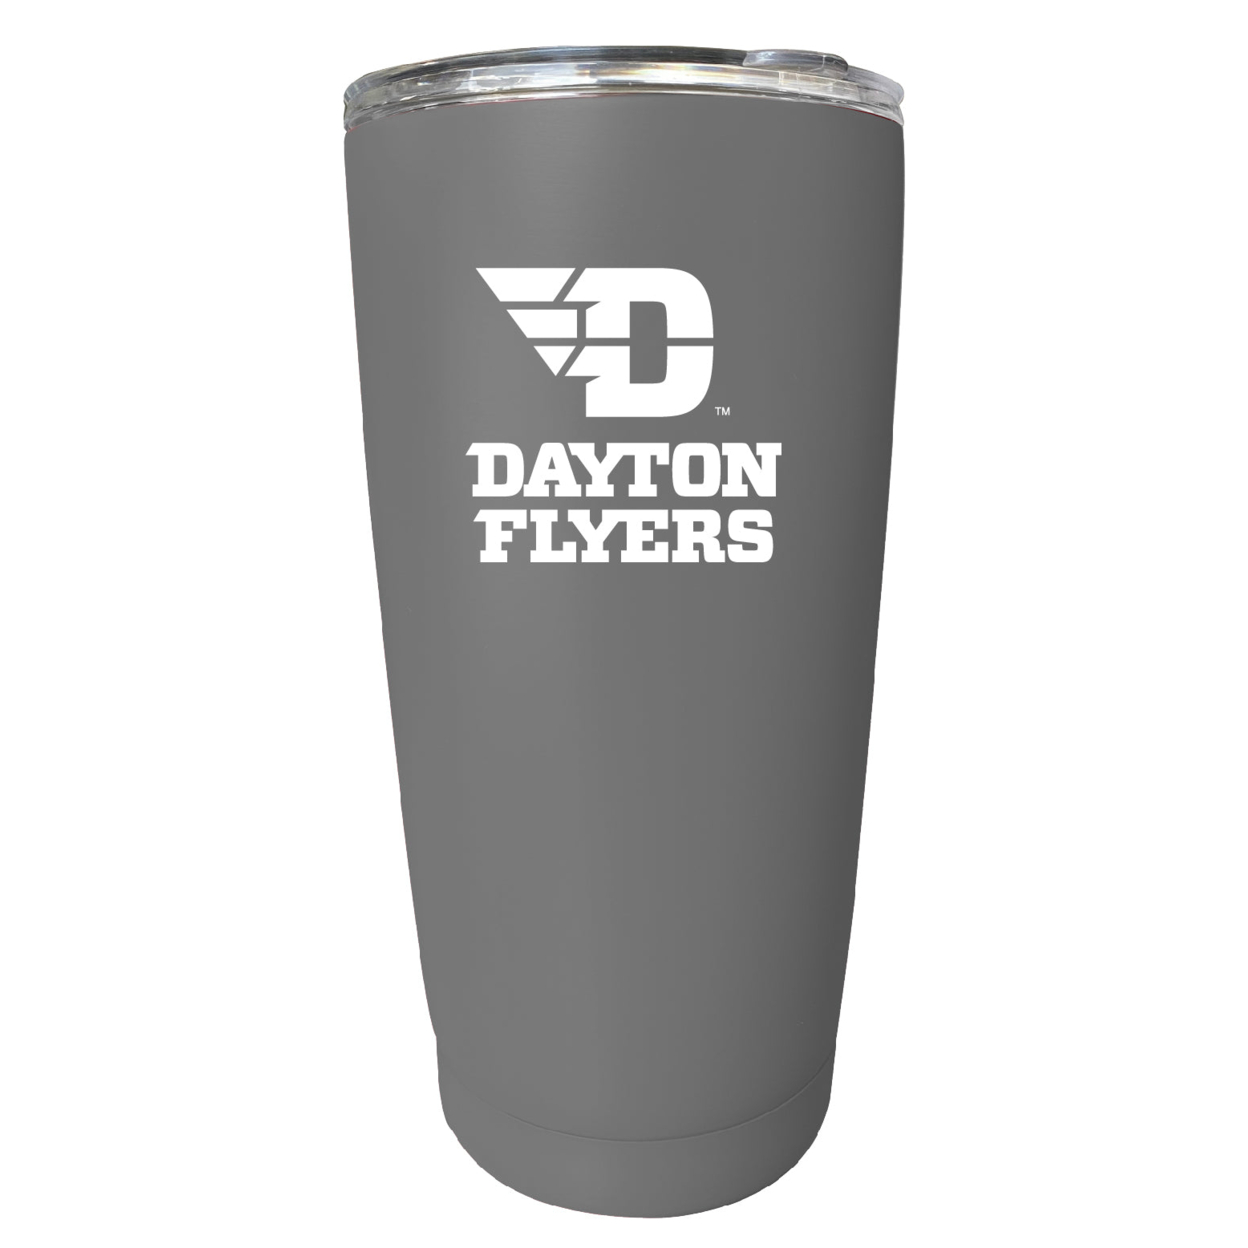 Dayton Flyers 16 Oz Stainless Steel Insulated Tumbler - Gray